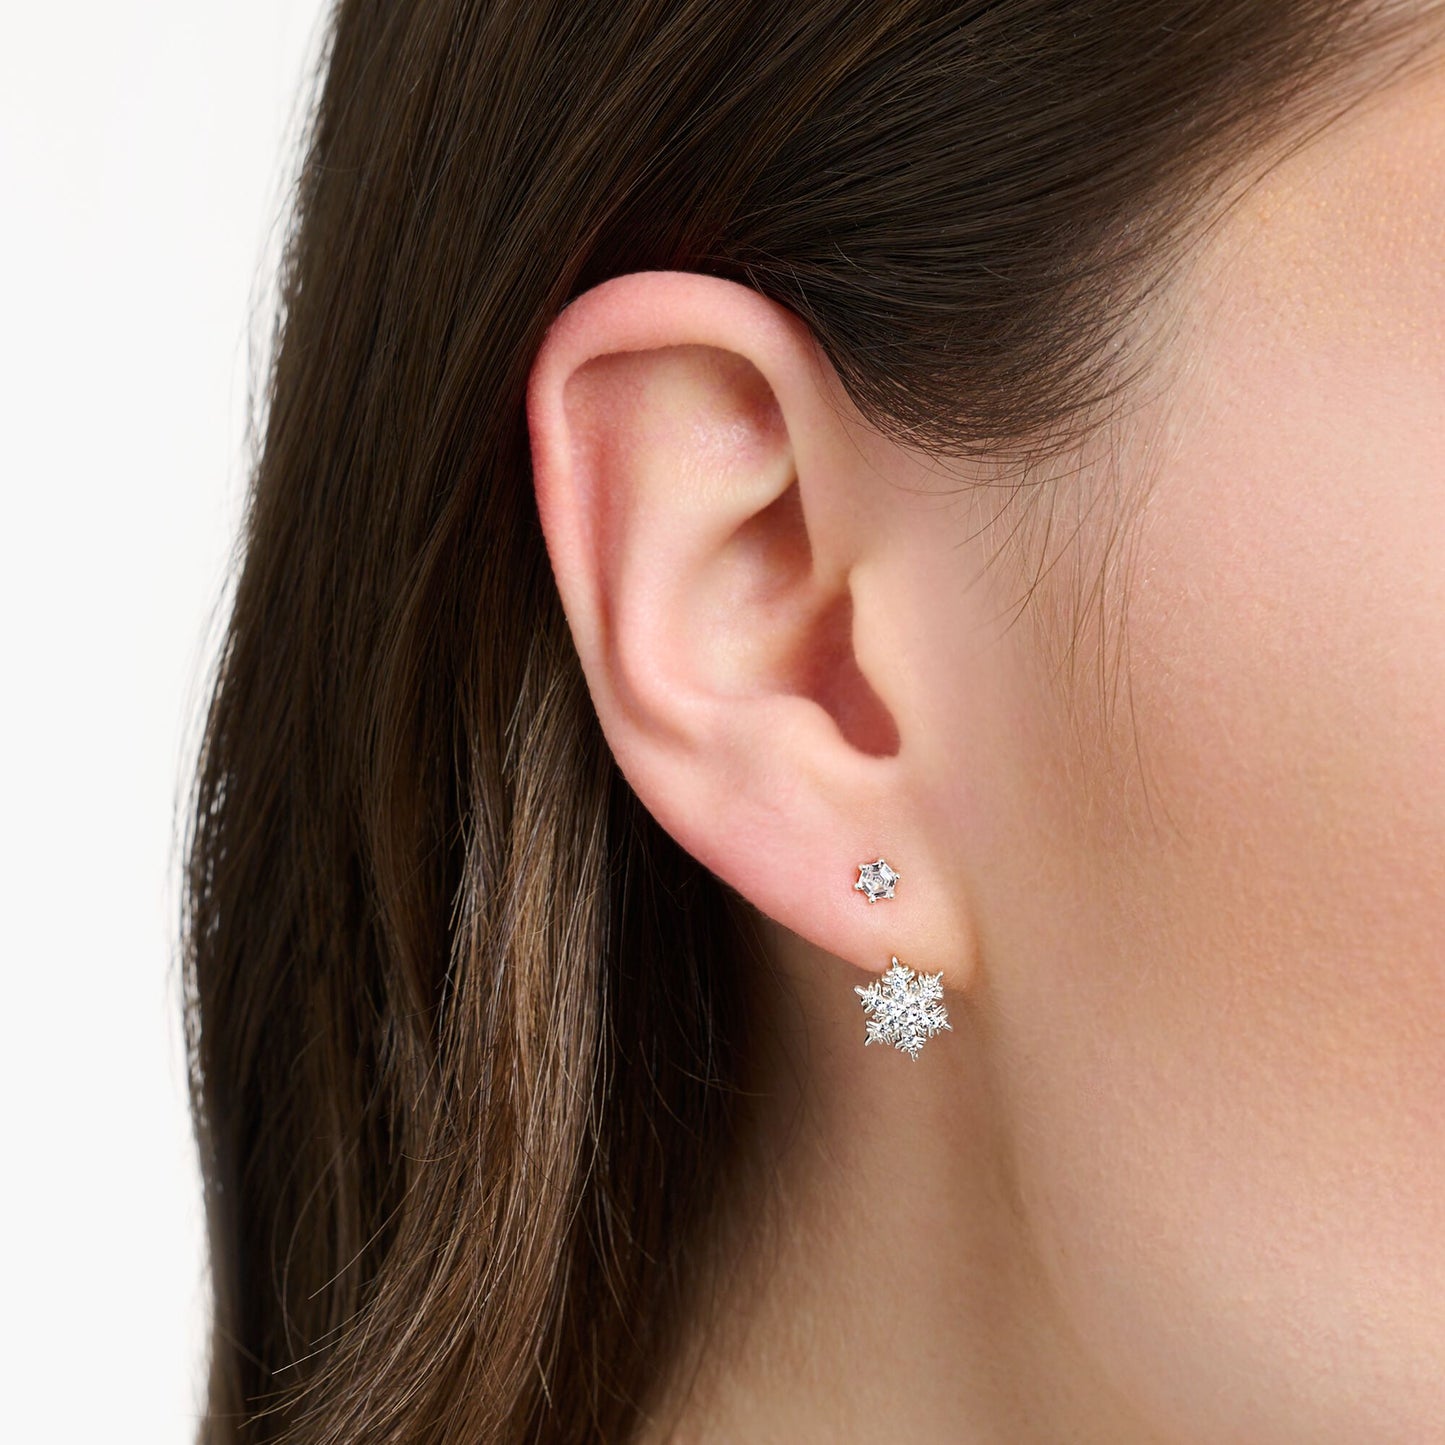 Single ear stud snowflake with white stones silver H2255-051-14